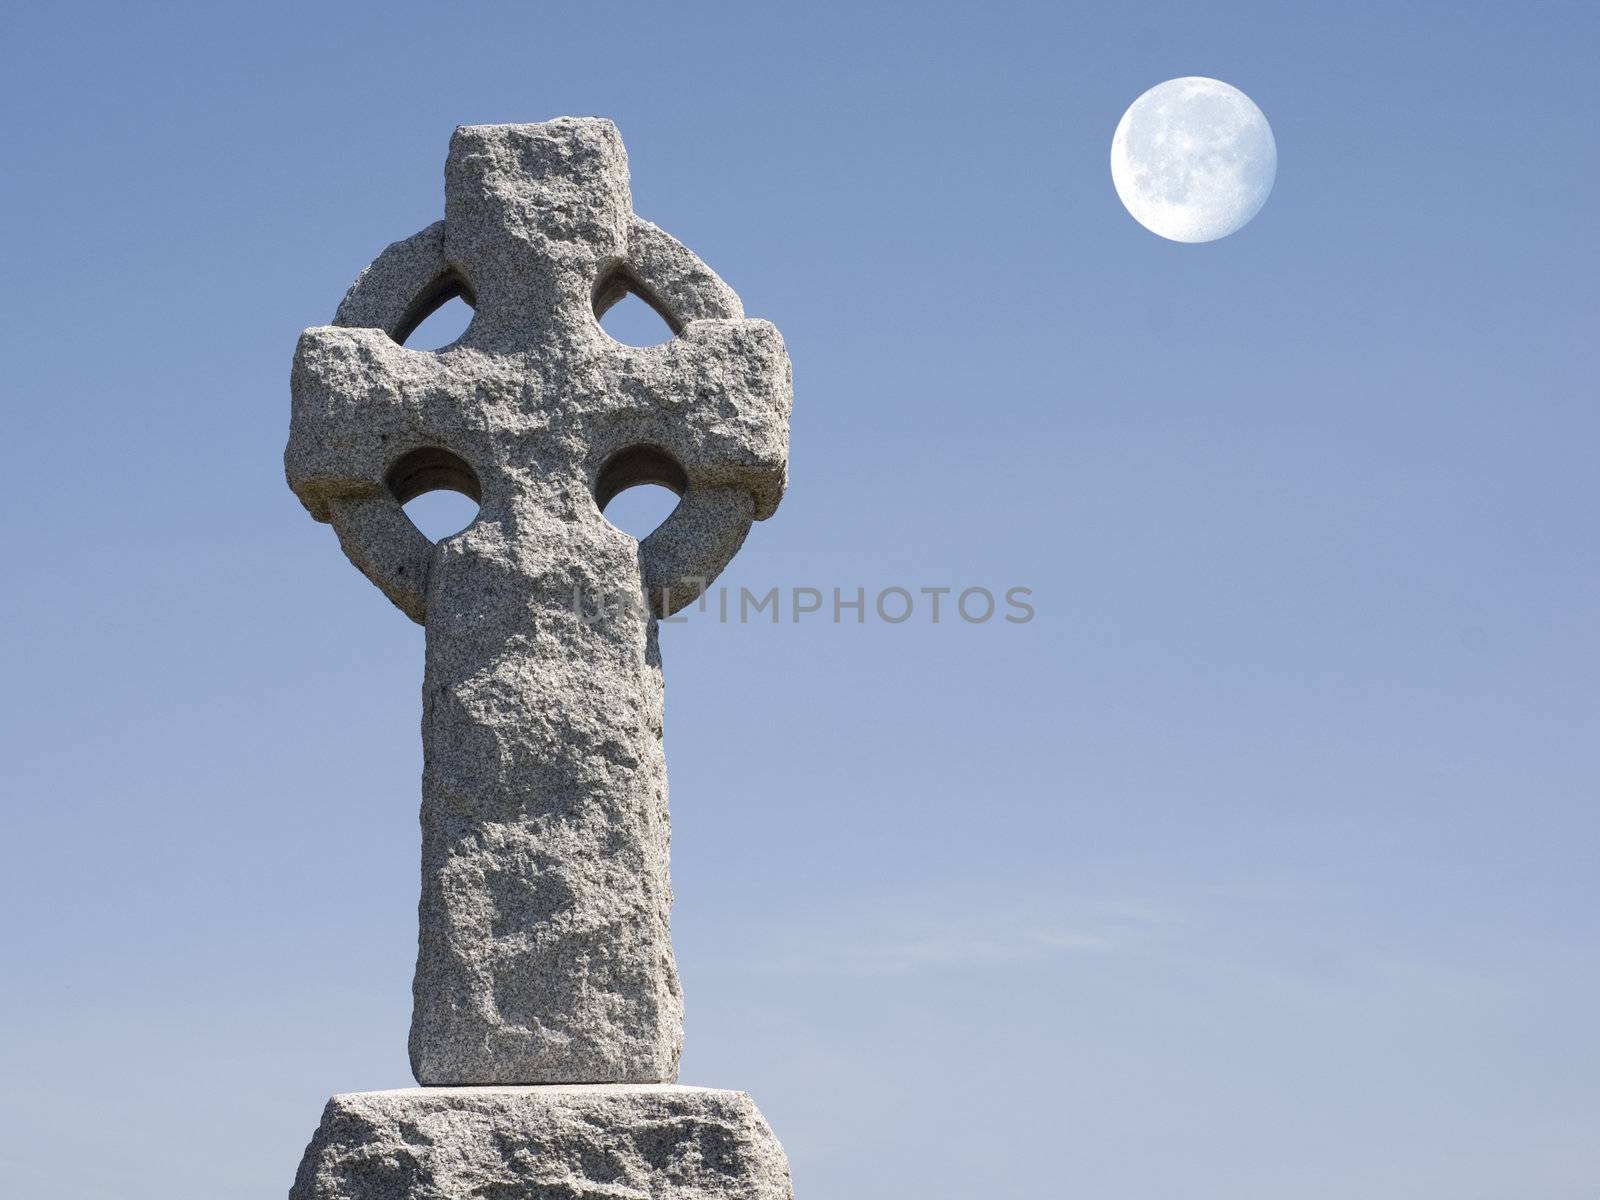 Celtic cross in a cementary with a full moon in the blue sky.